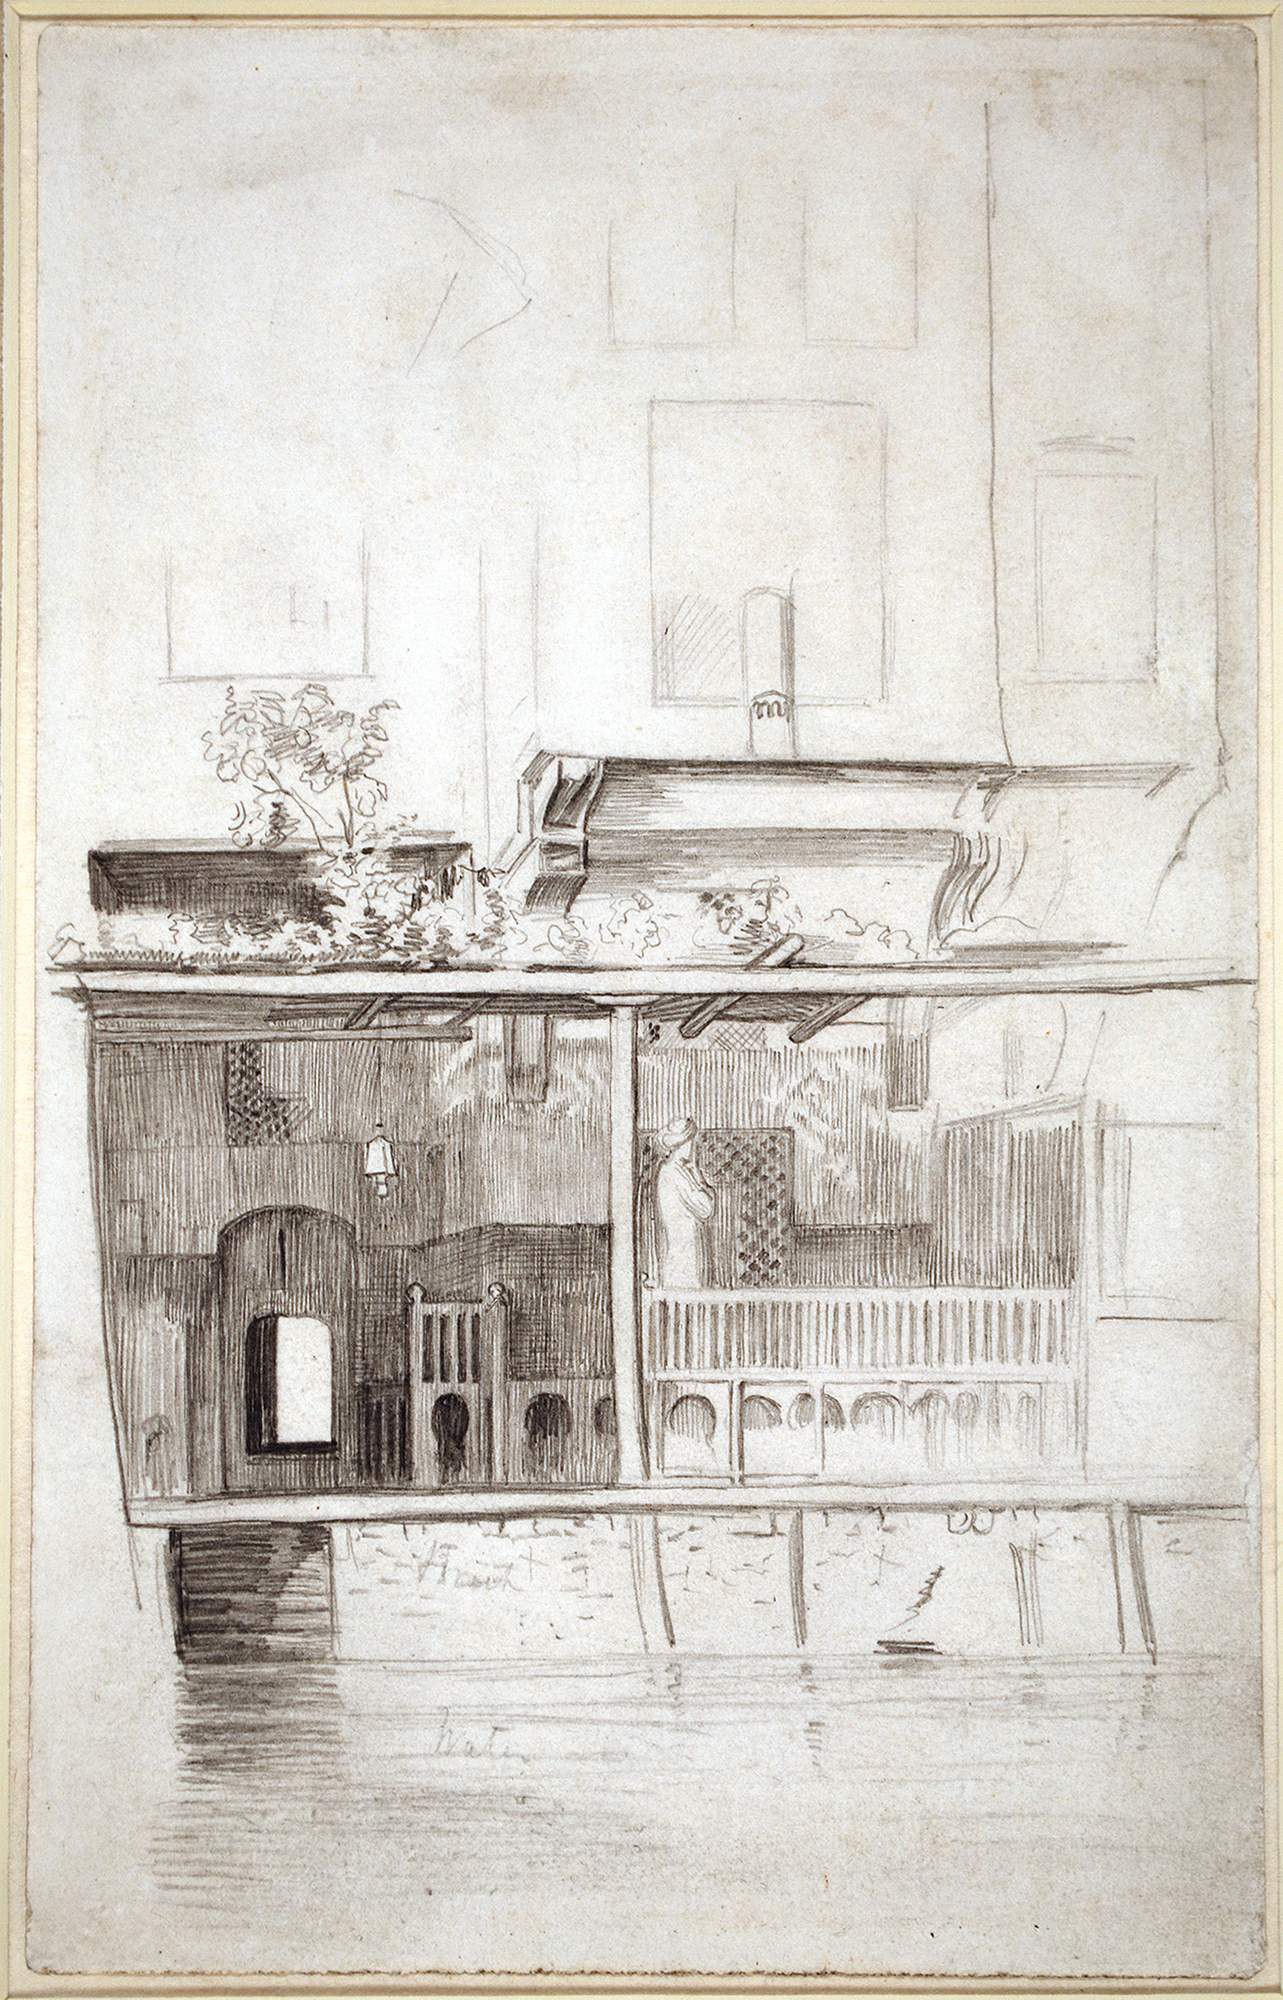 A drawing of the courtyard of a waterfront home